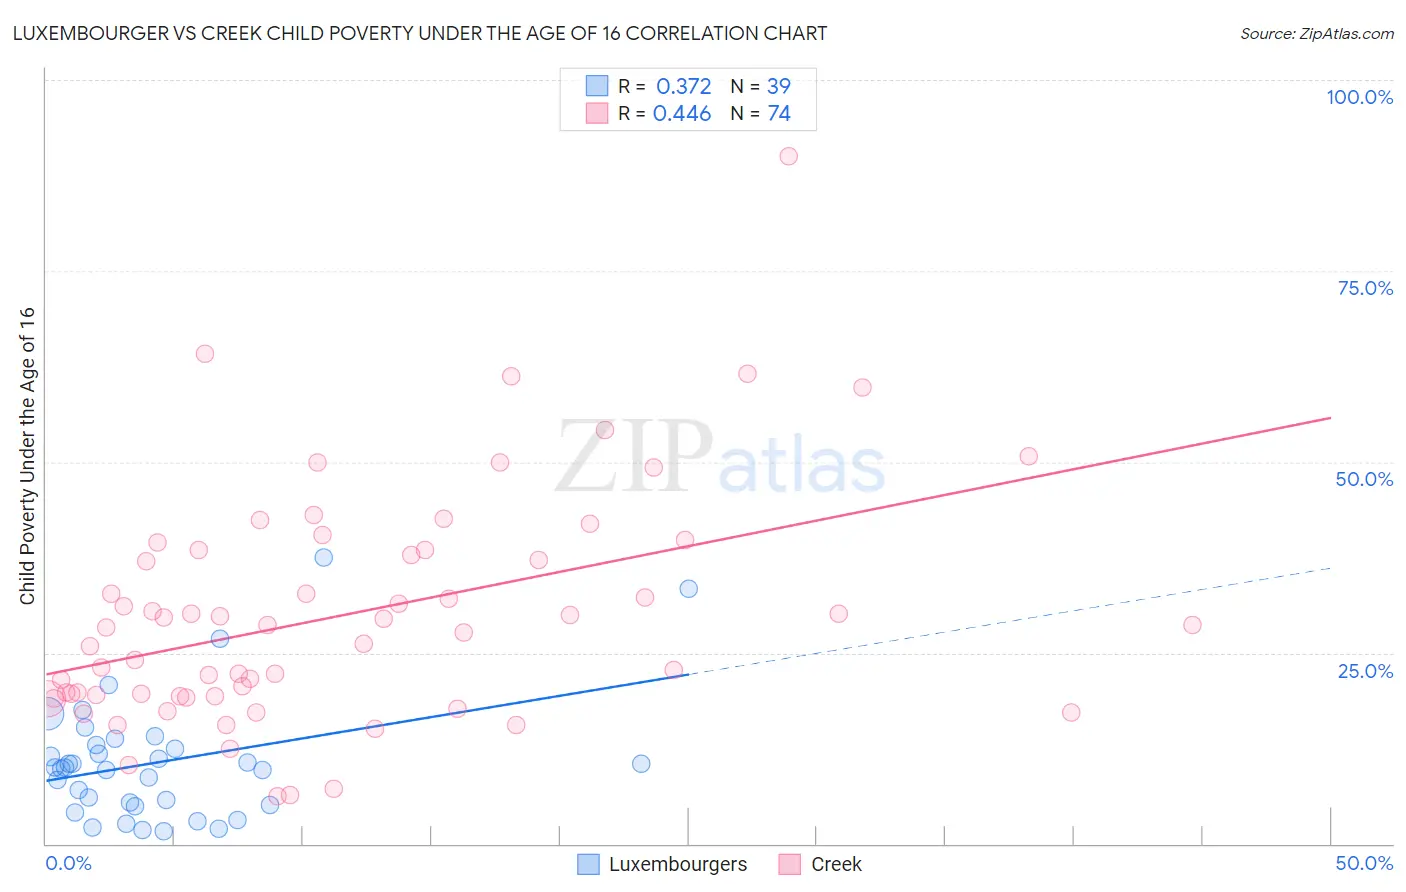 Luxembourger vs Creek Child Poverty Under the Age of 16